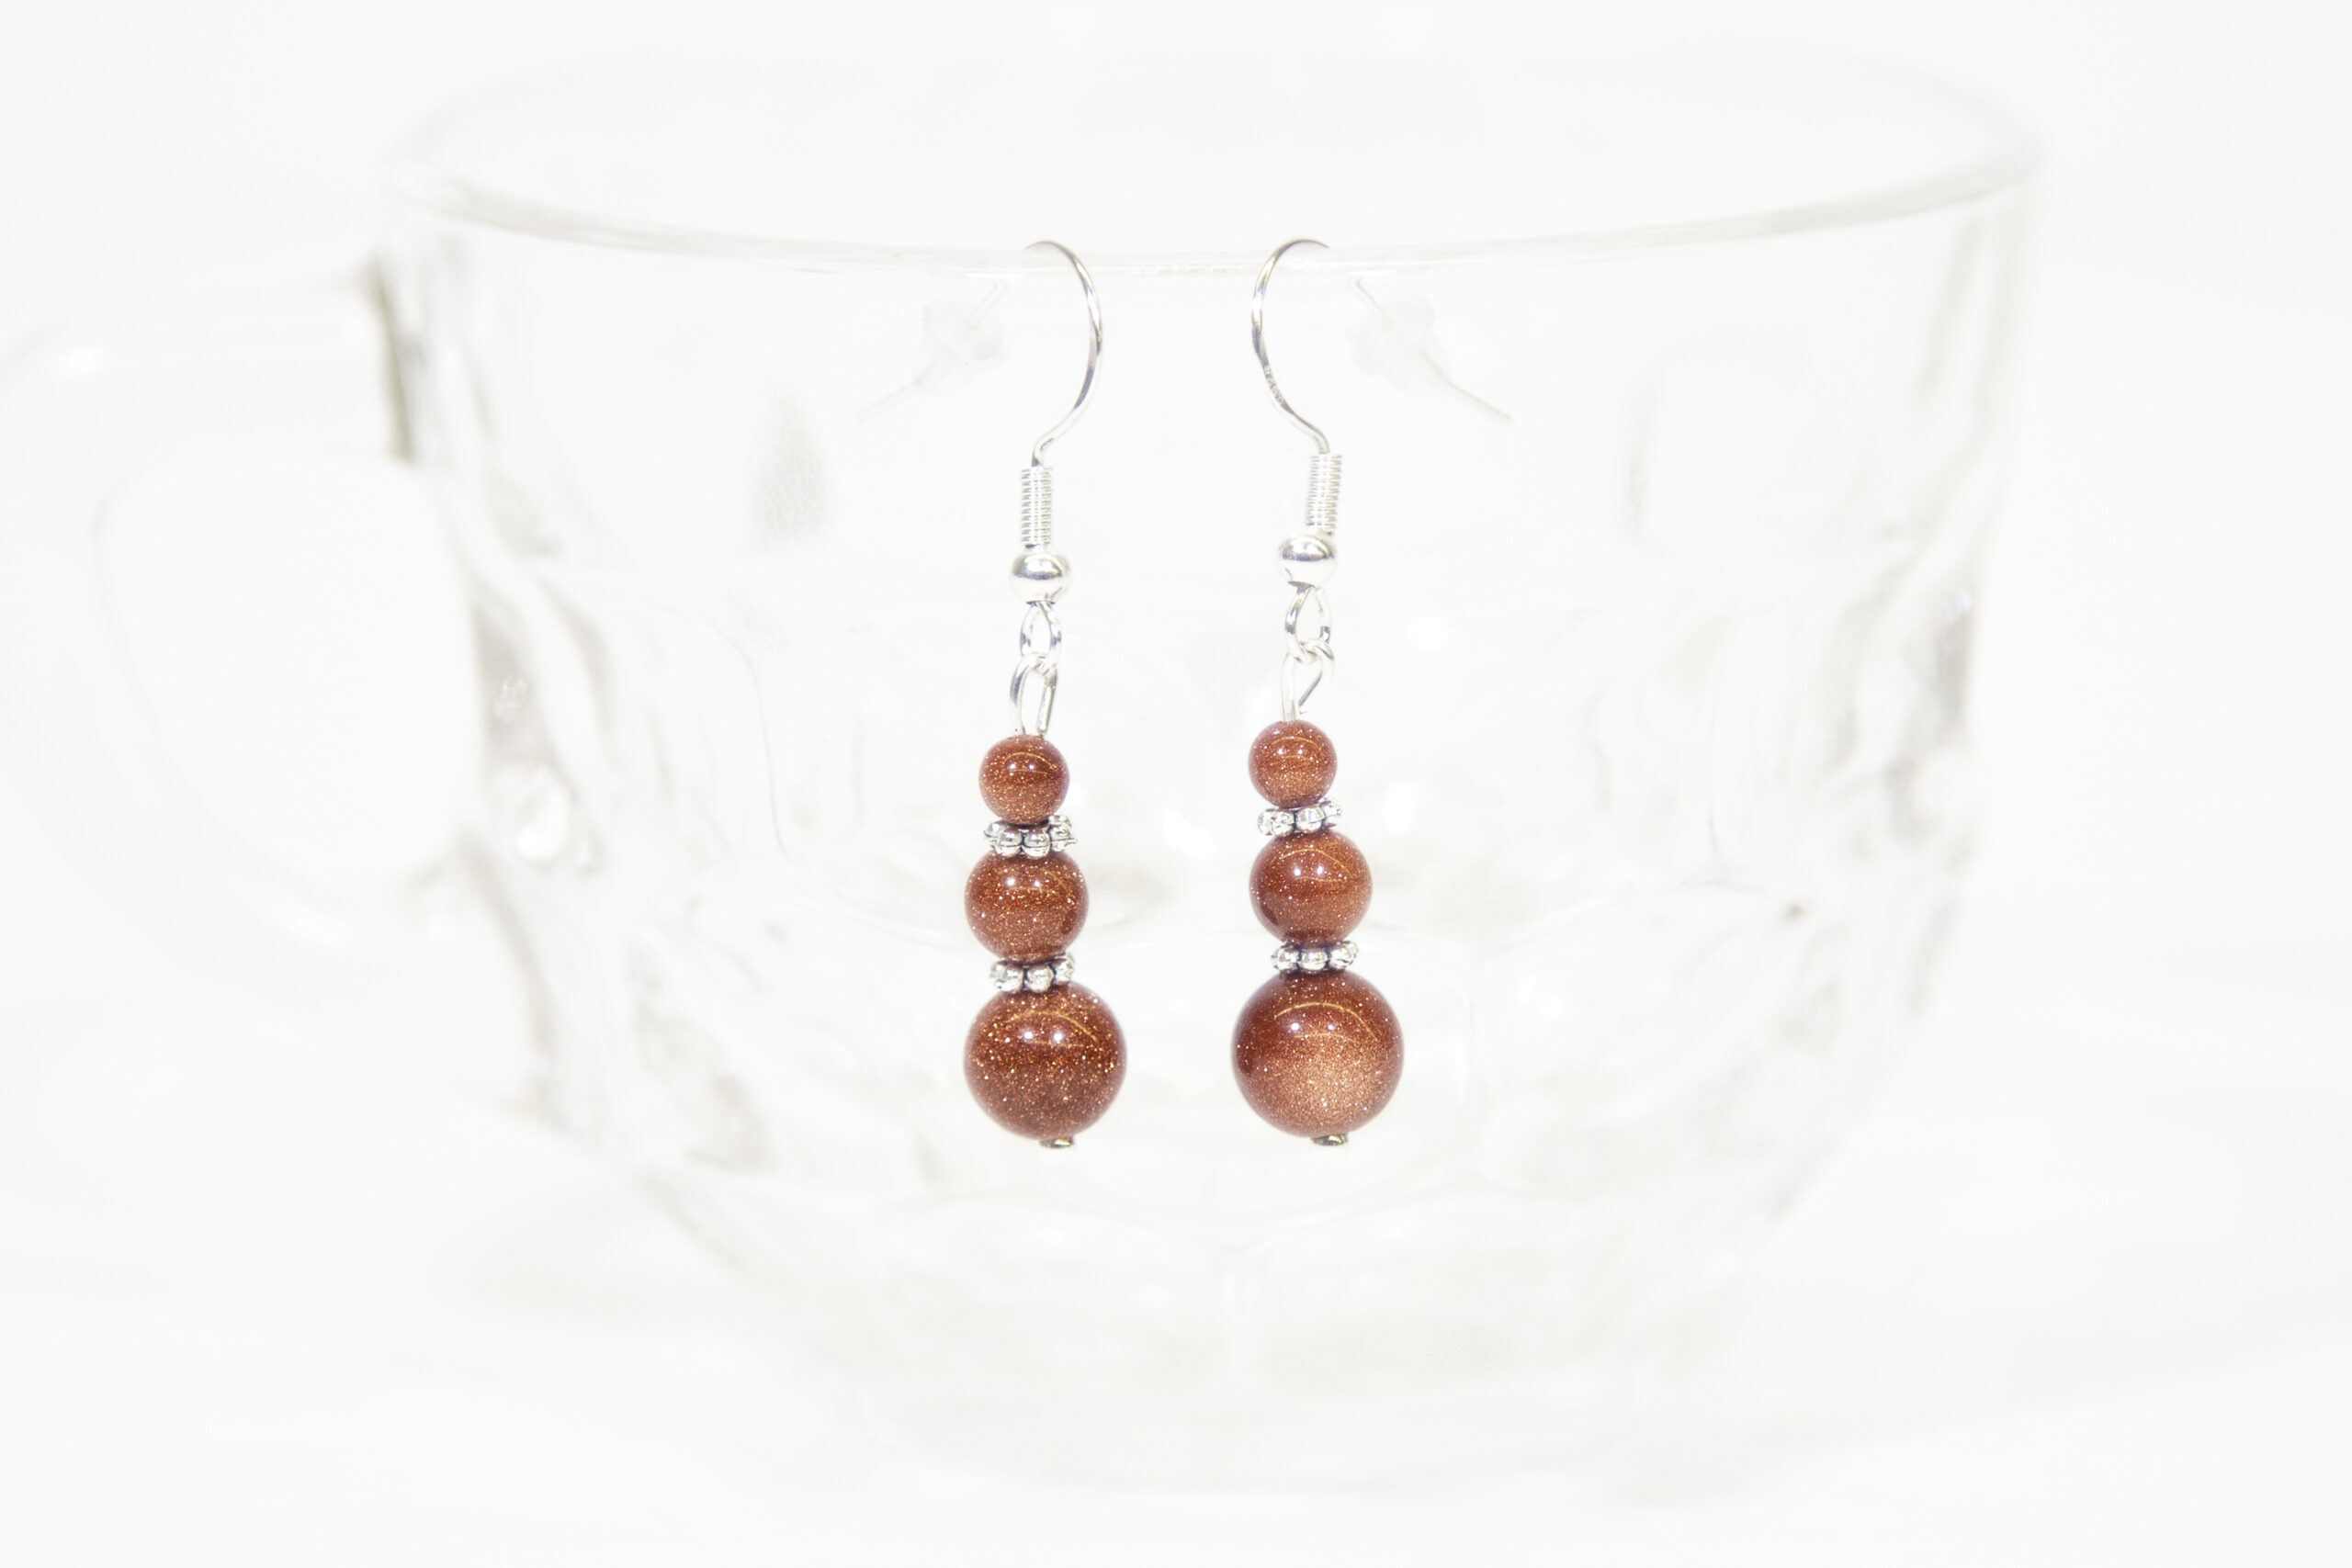 Goldstone Earrings hanging on a glass cup